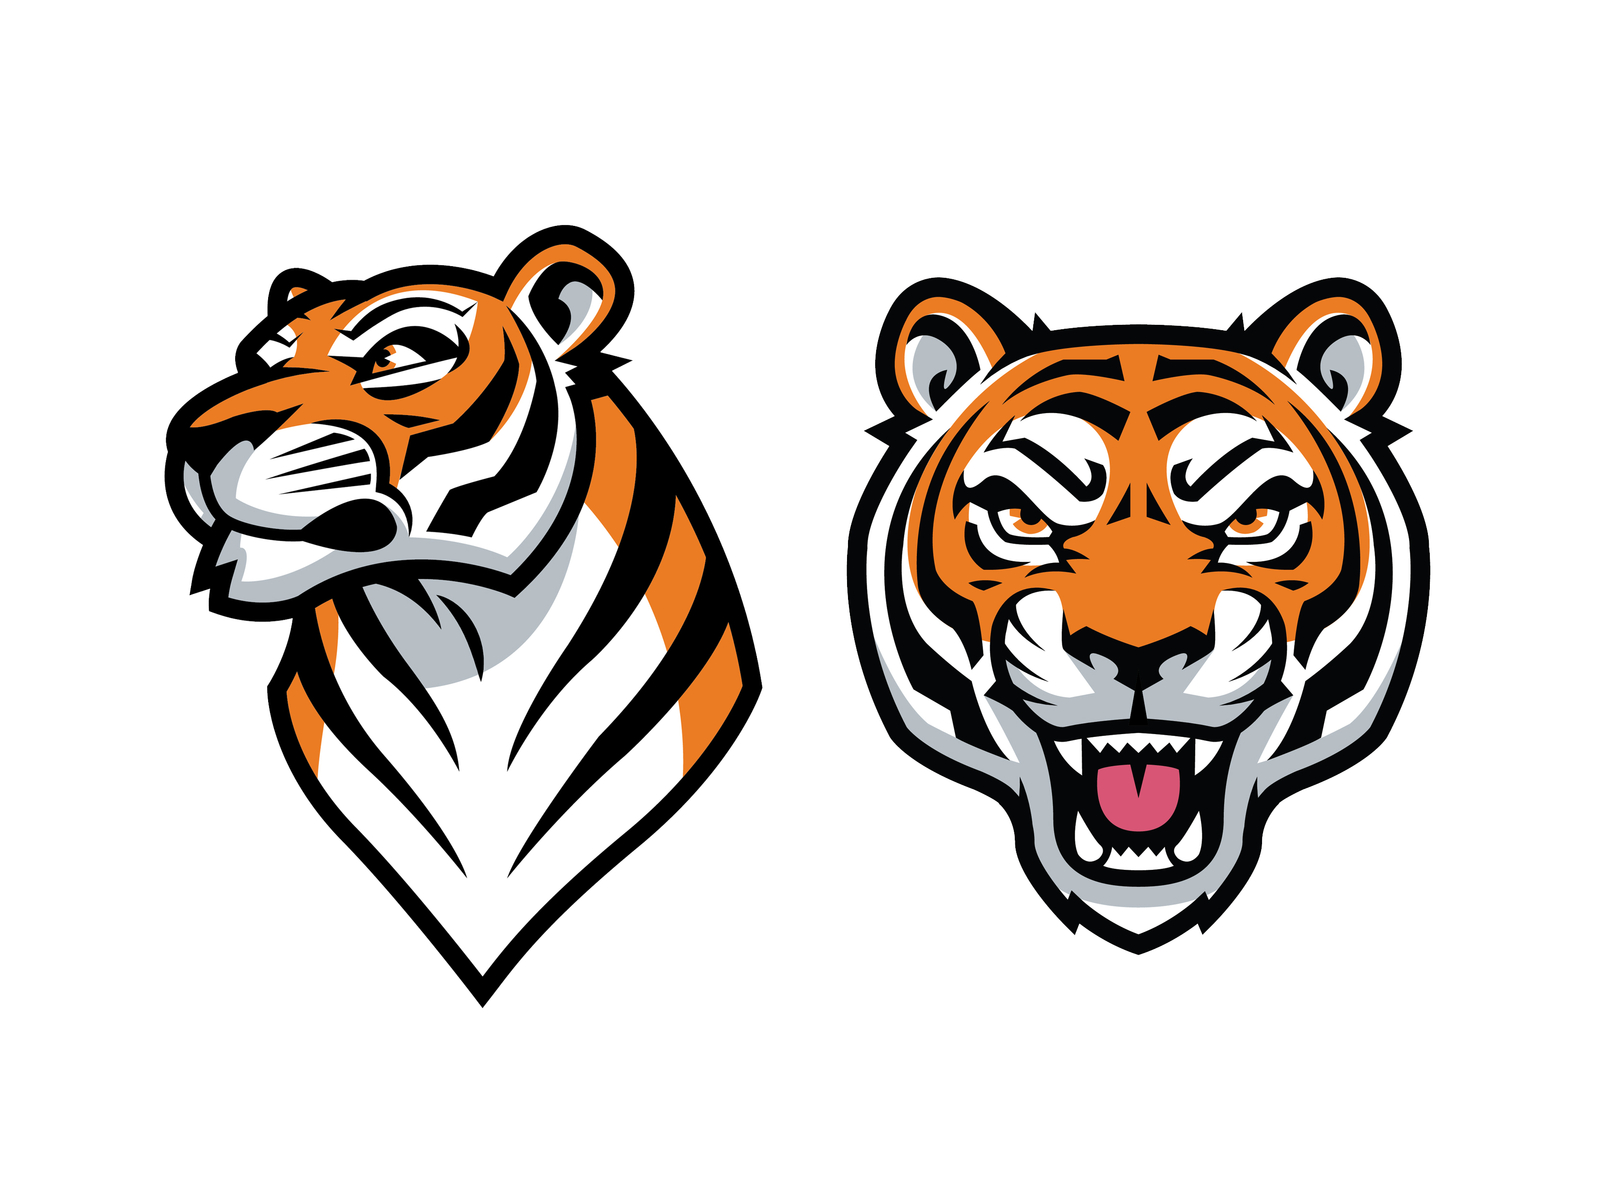 Download Tiger Vector Graphics by Kyle Petchock on Dribbble